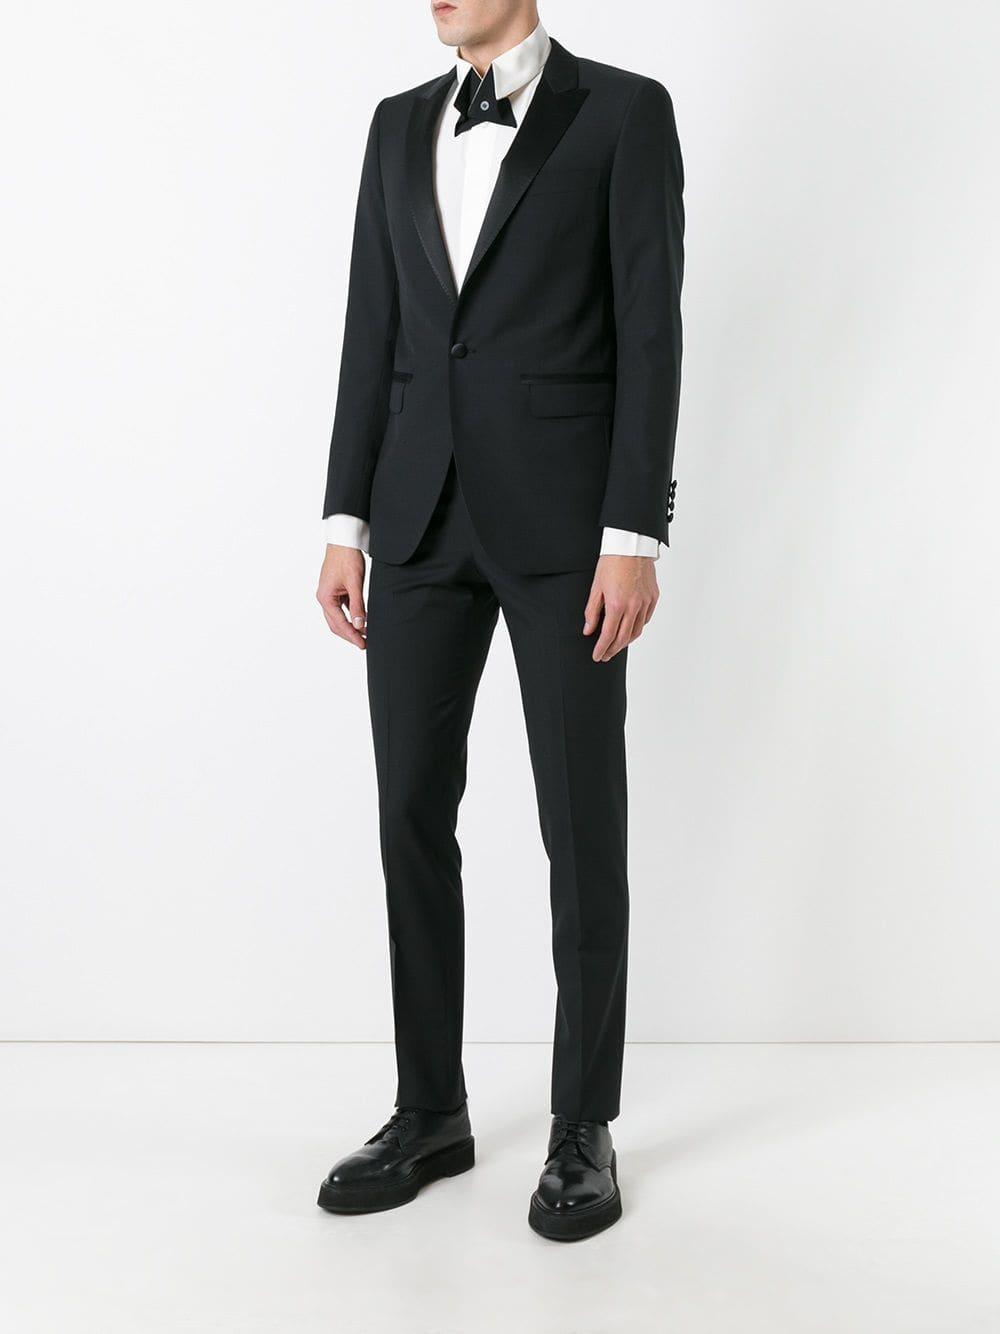 Lanvin Wool Classic Two-piece Suit in Black for Men - Lyst